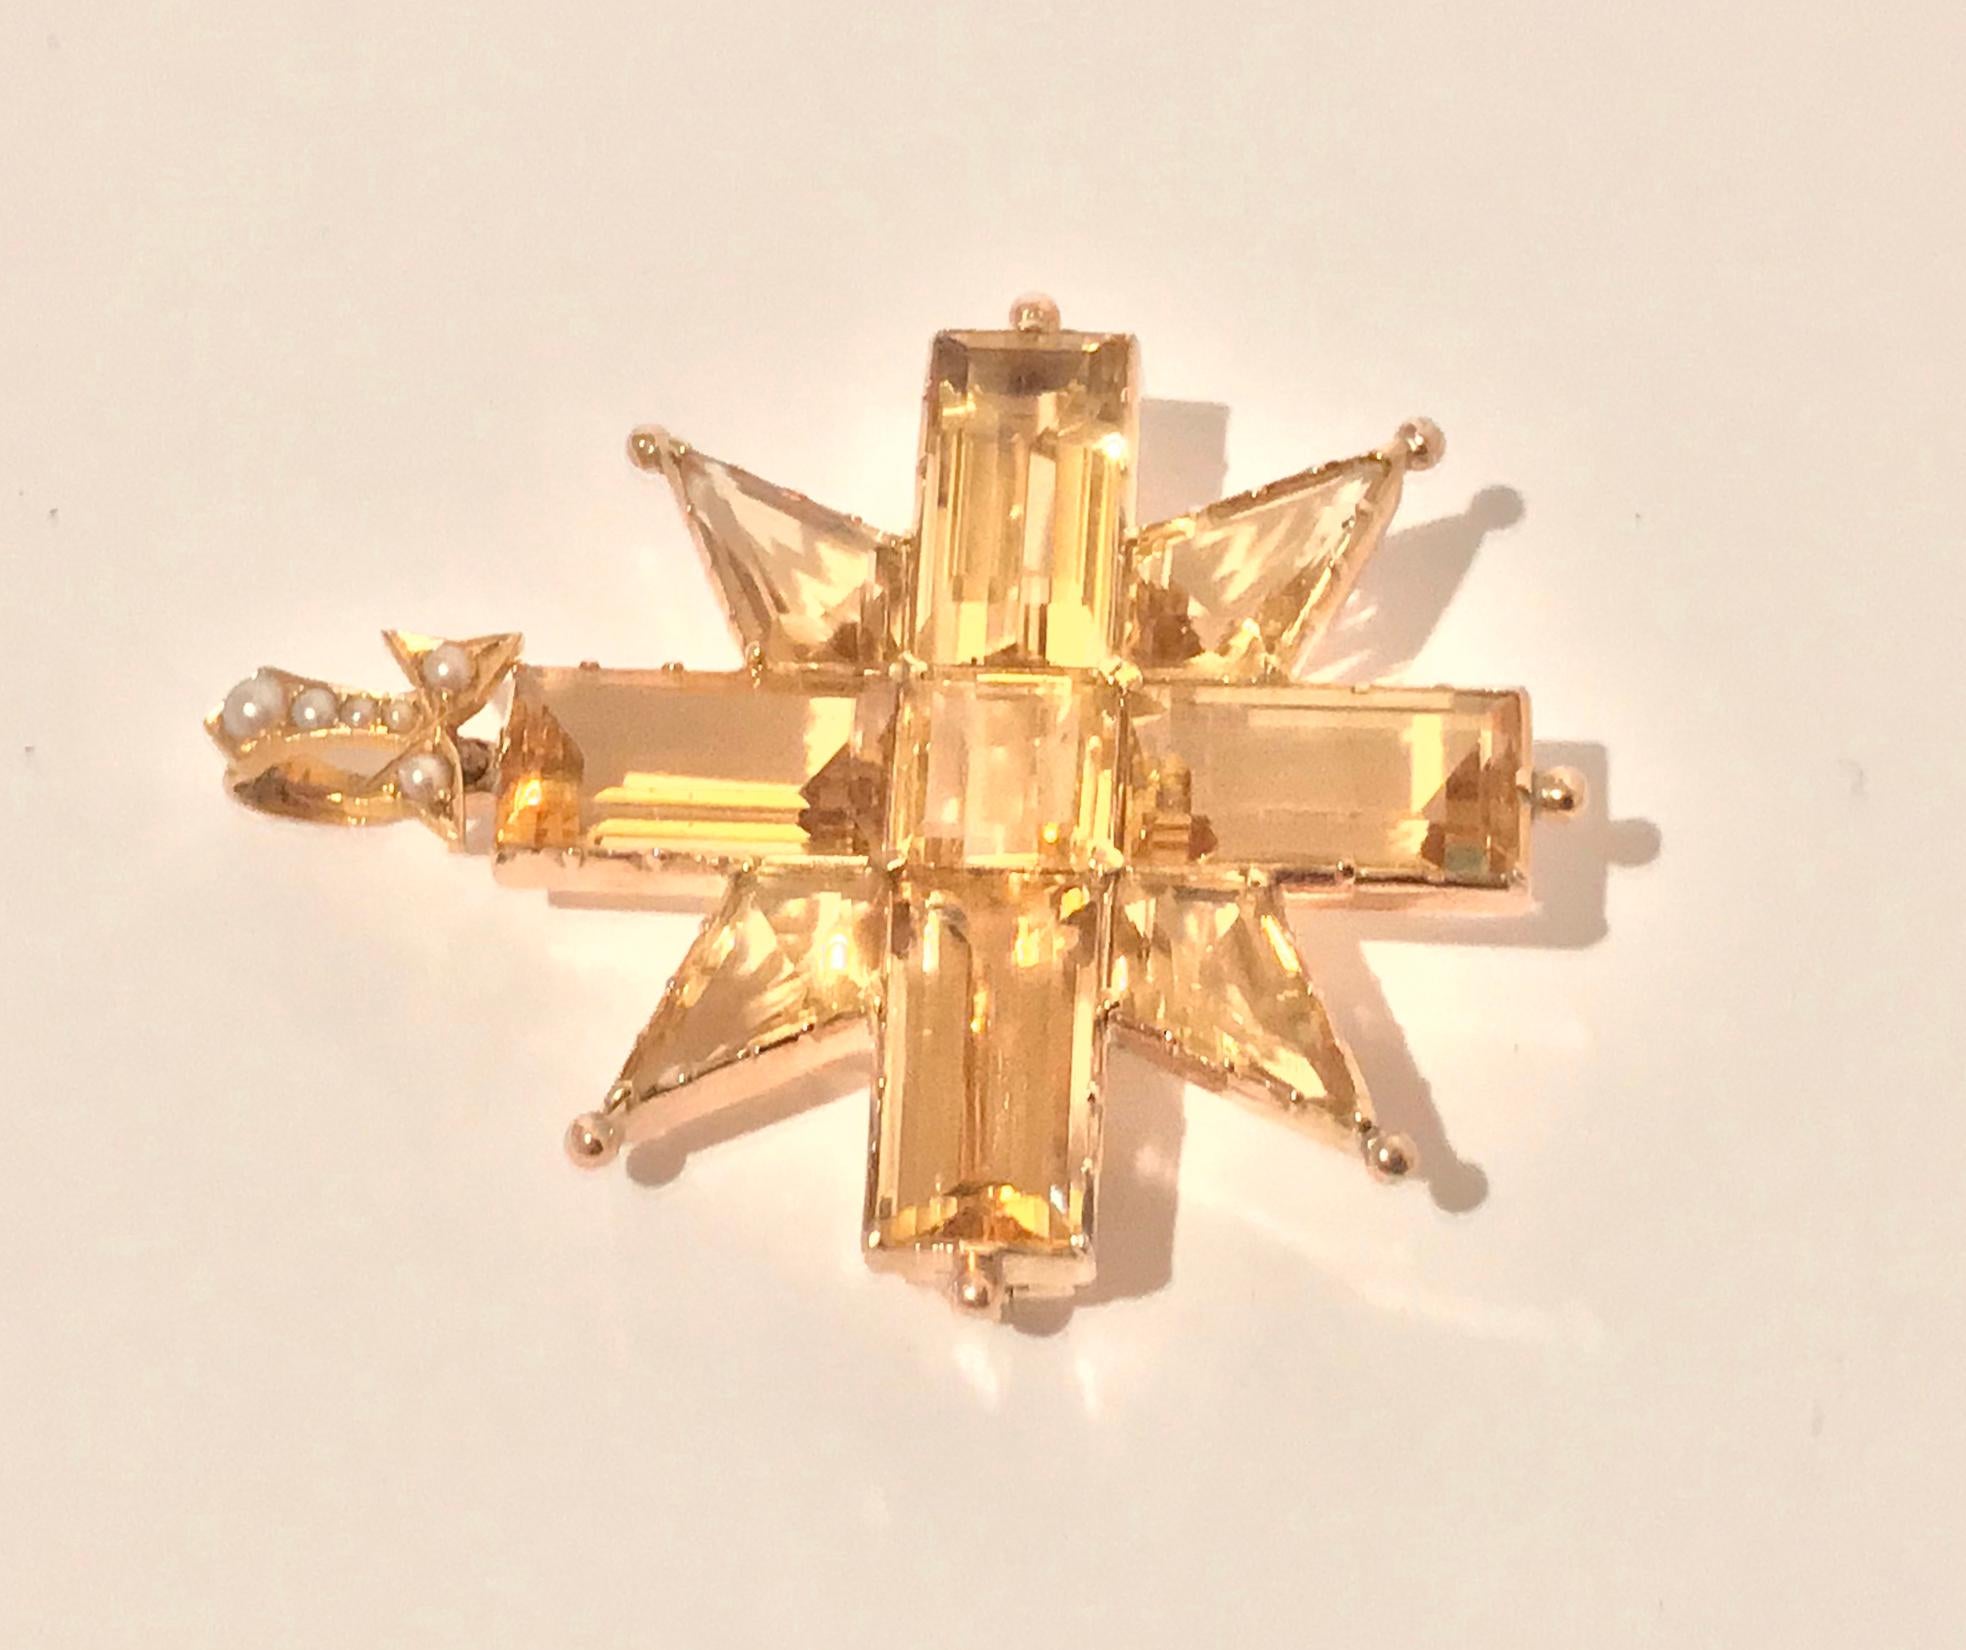 Antique 14K Gold Citrine Maltese Cross Pendant Brooch, C. 1900. The Cross claw and bead set with custom cut citrine surmounted with detachable fleur de lays seed pearl set bale for pendant. Pin to reverse. Gold acid tested 14K. Measures: